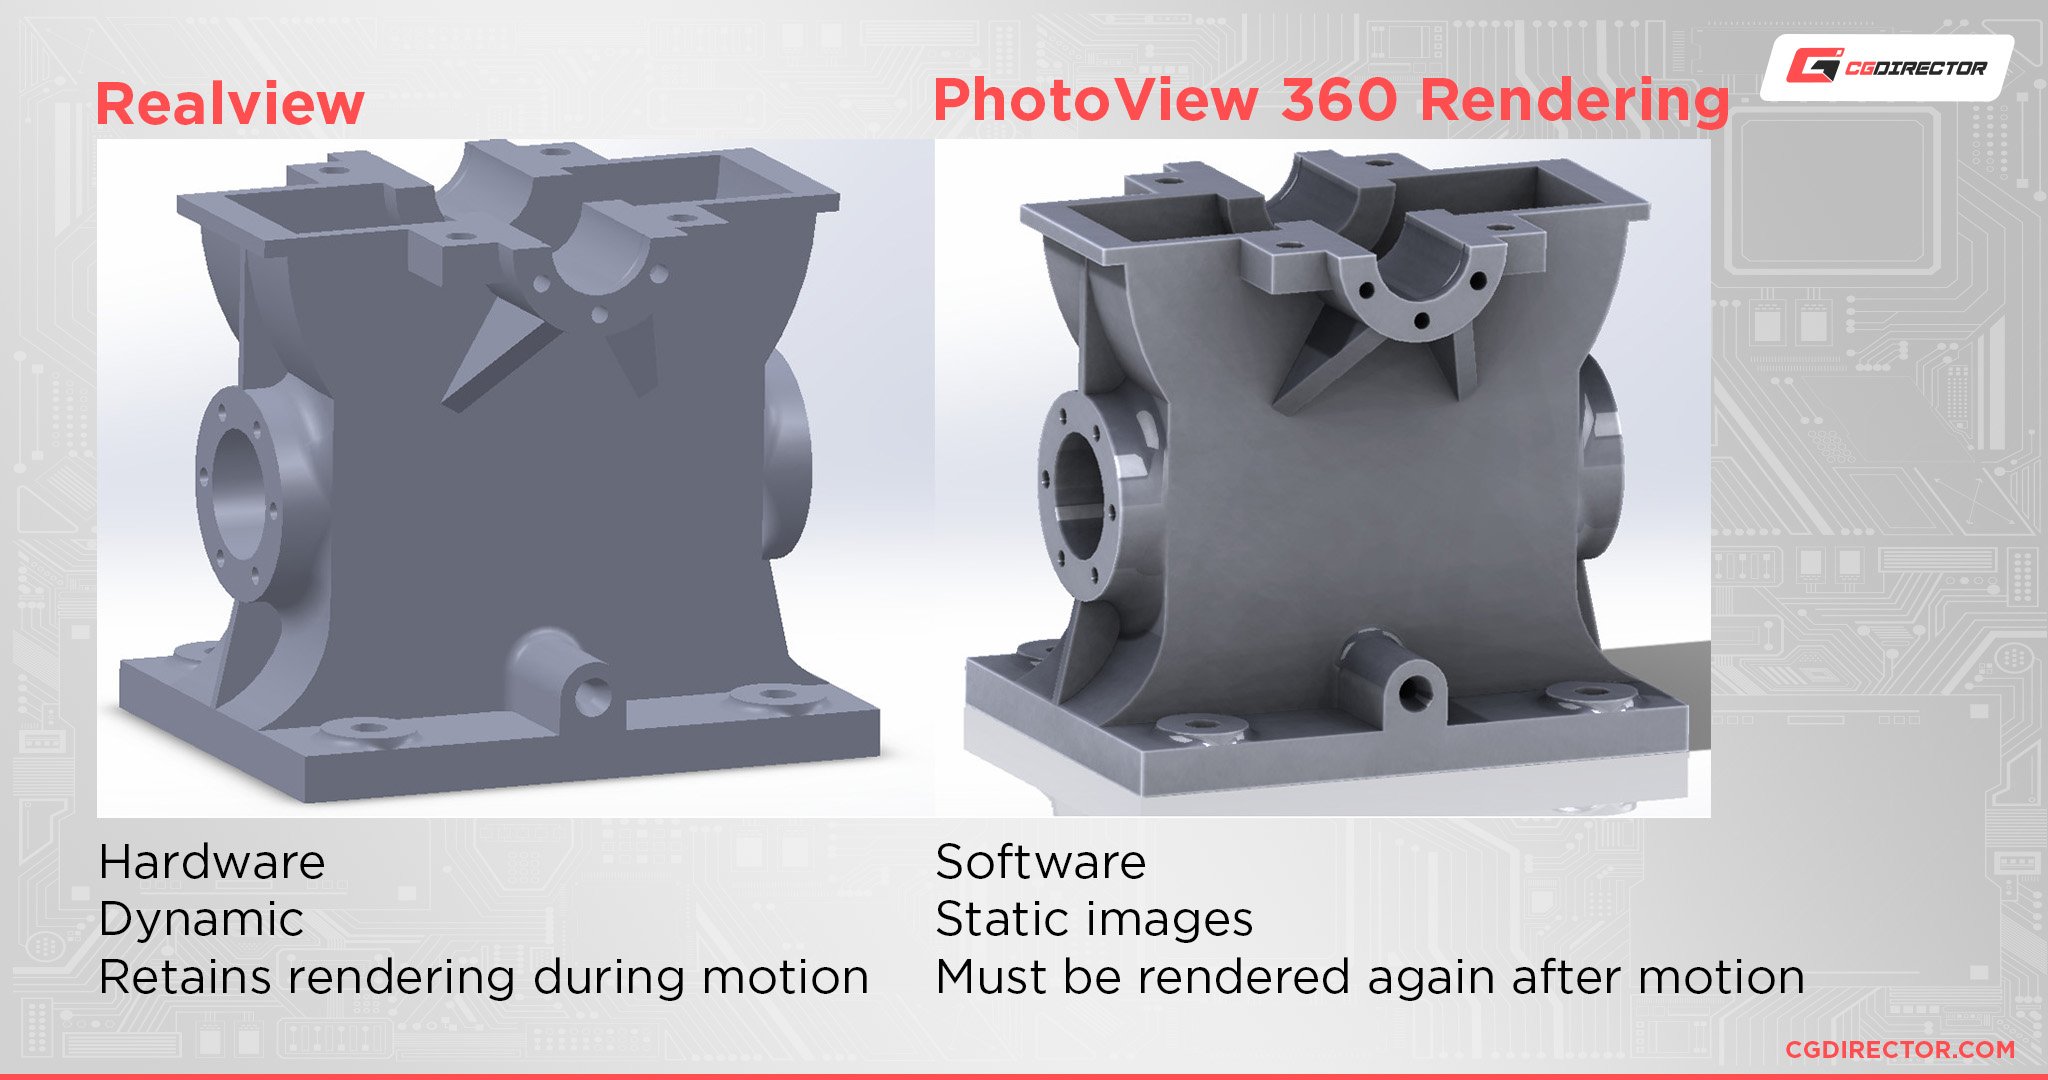 Solidworks Realview vs PhotoView 360